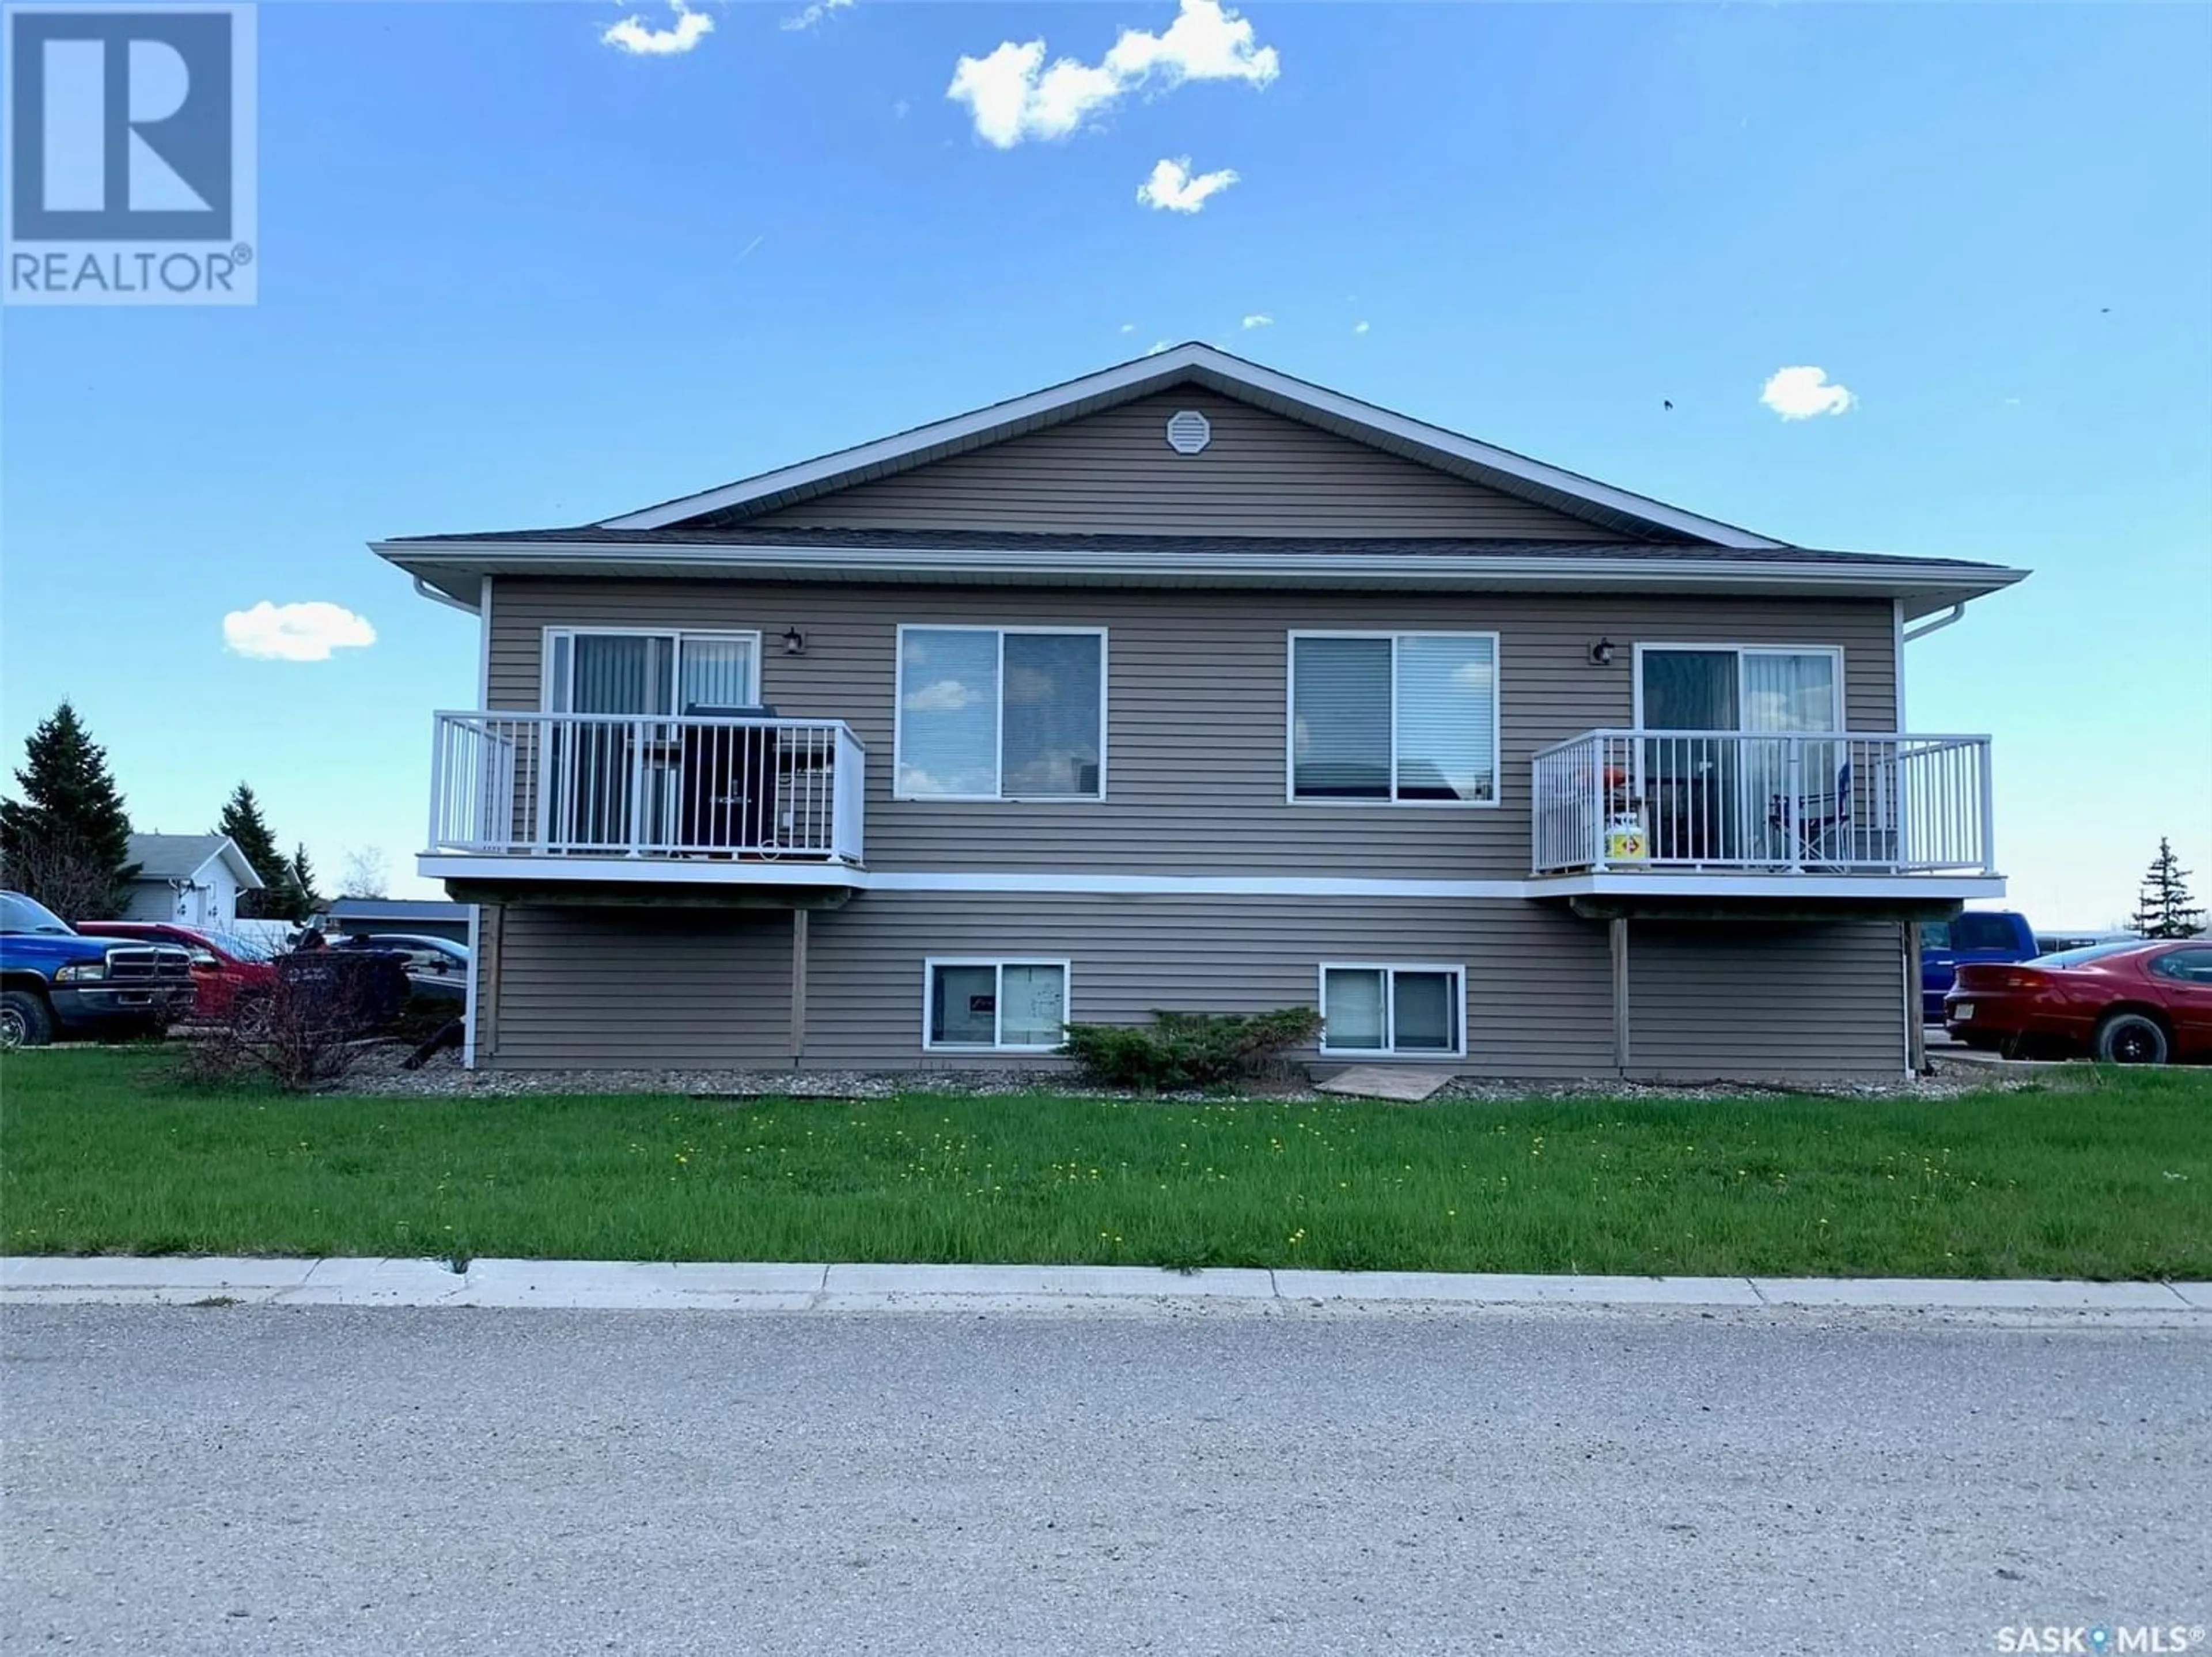 A pic from exterior of the house or condo for 1102 Park AVENUE, Rocanville Saskatchewan S0A3L0